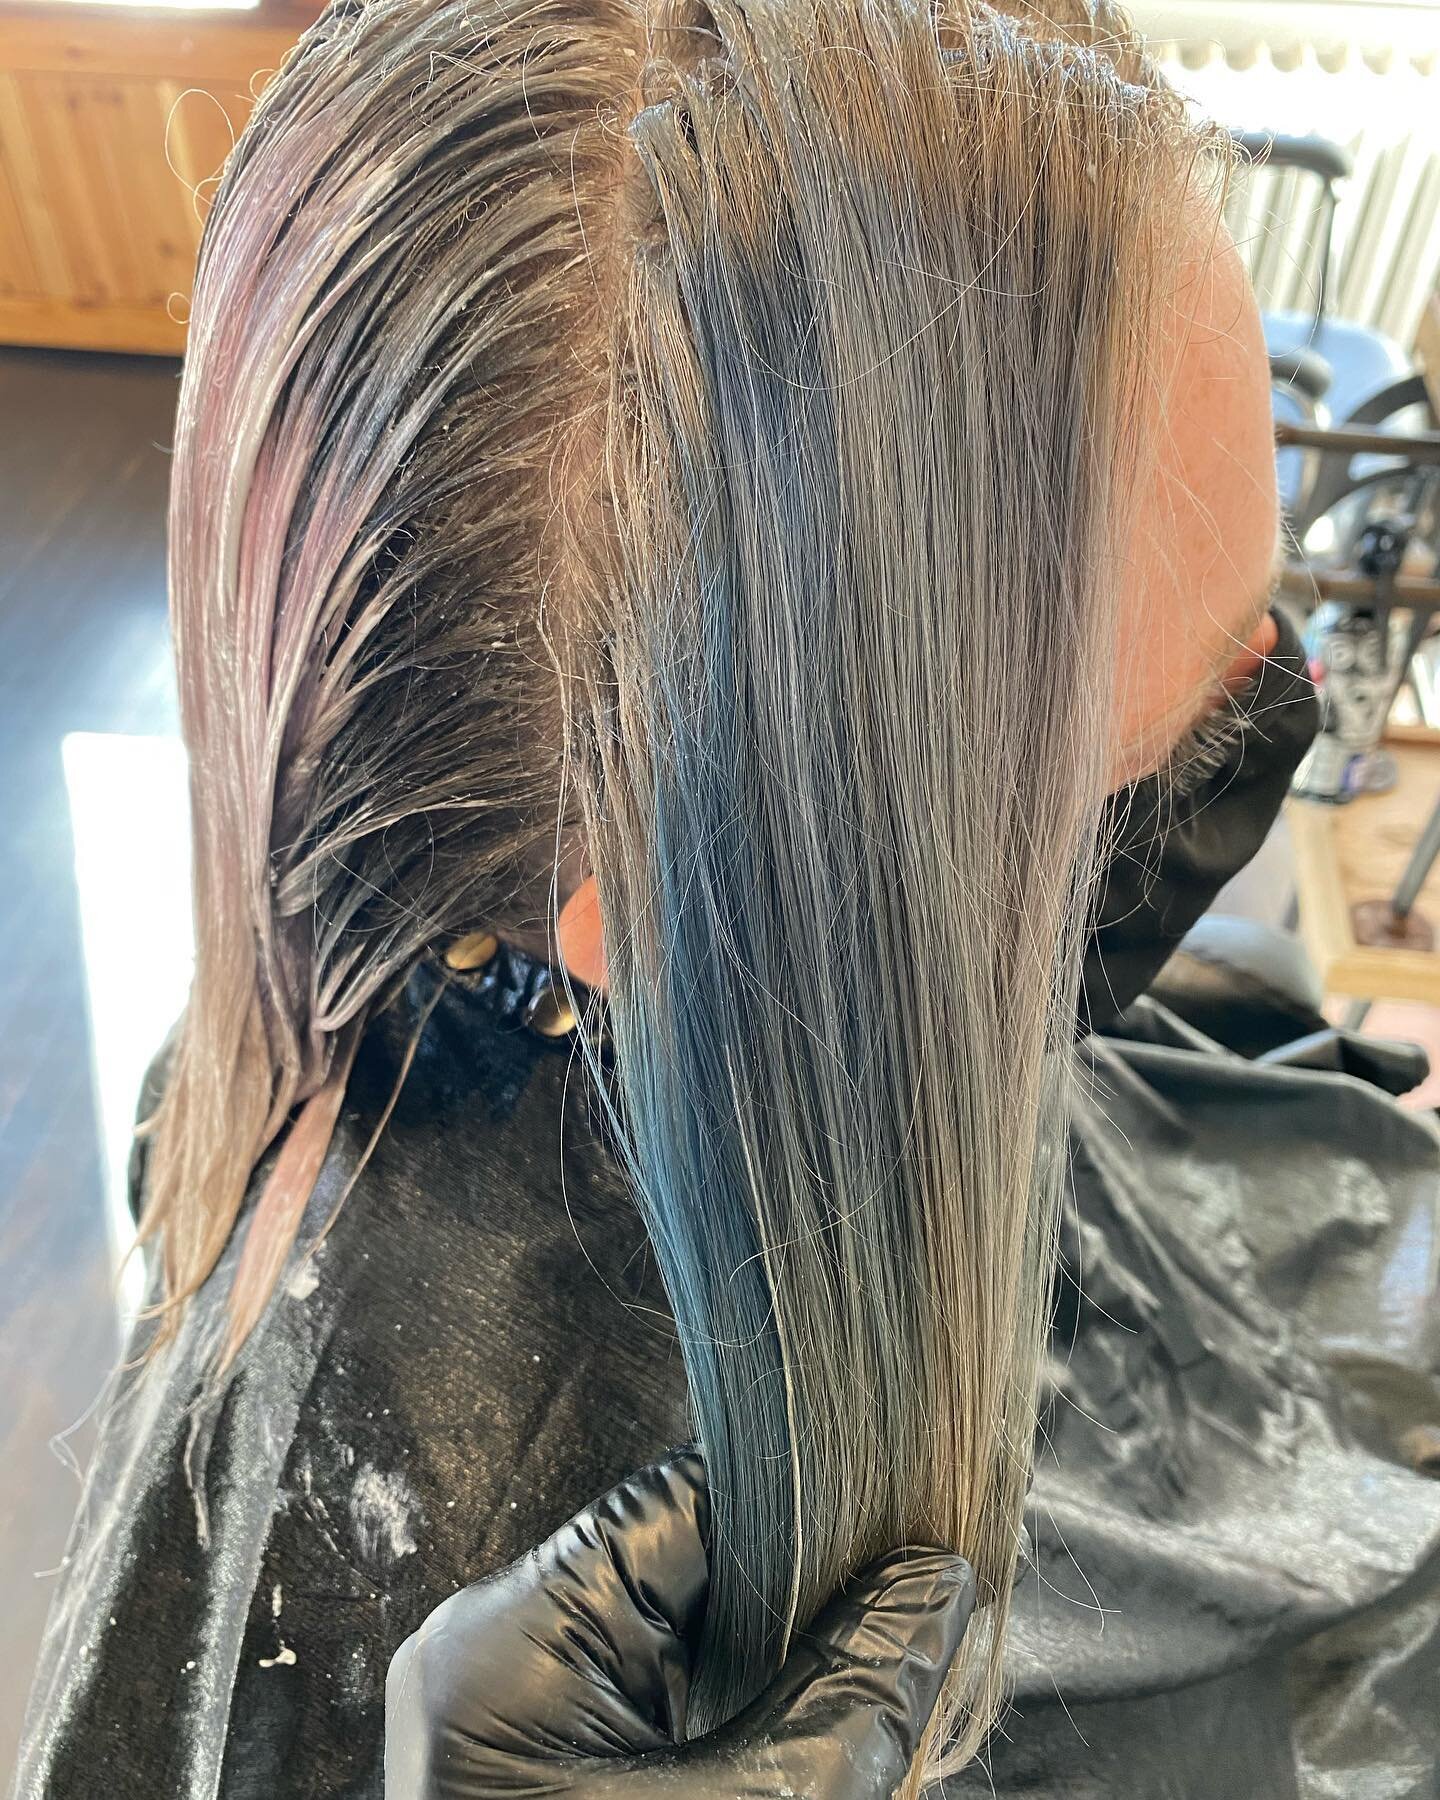 A hair dressers nightmare of box dyed blonde and then covered with Blue Splat turned into a mauve dream. 🤤
🐌
Color corrections are and up and down emotional roller coaster for your stylist. Please stay away from the box dyes 🙃